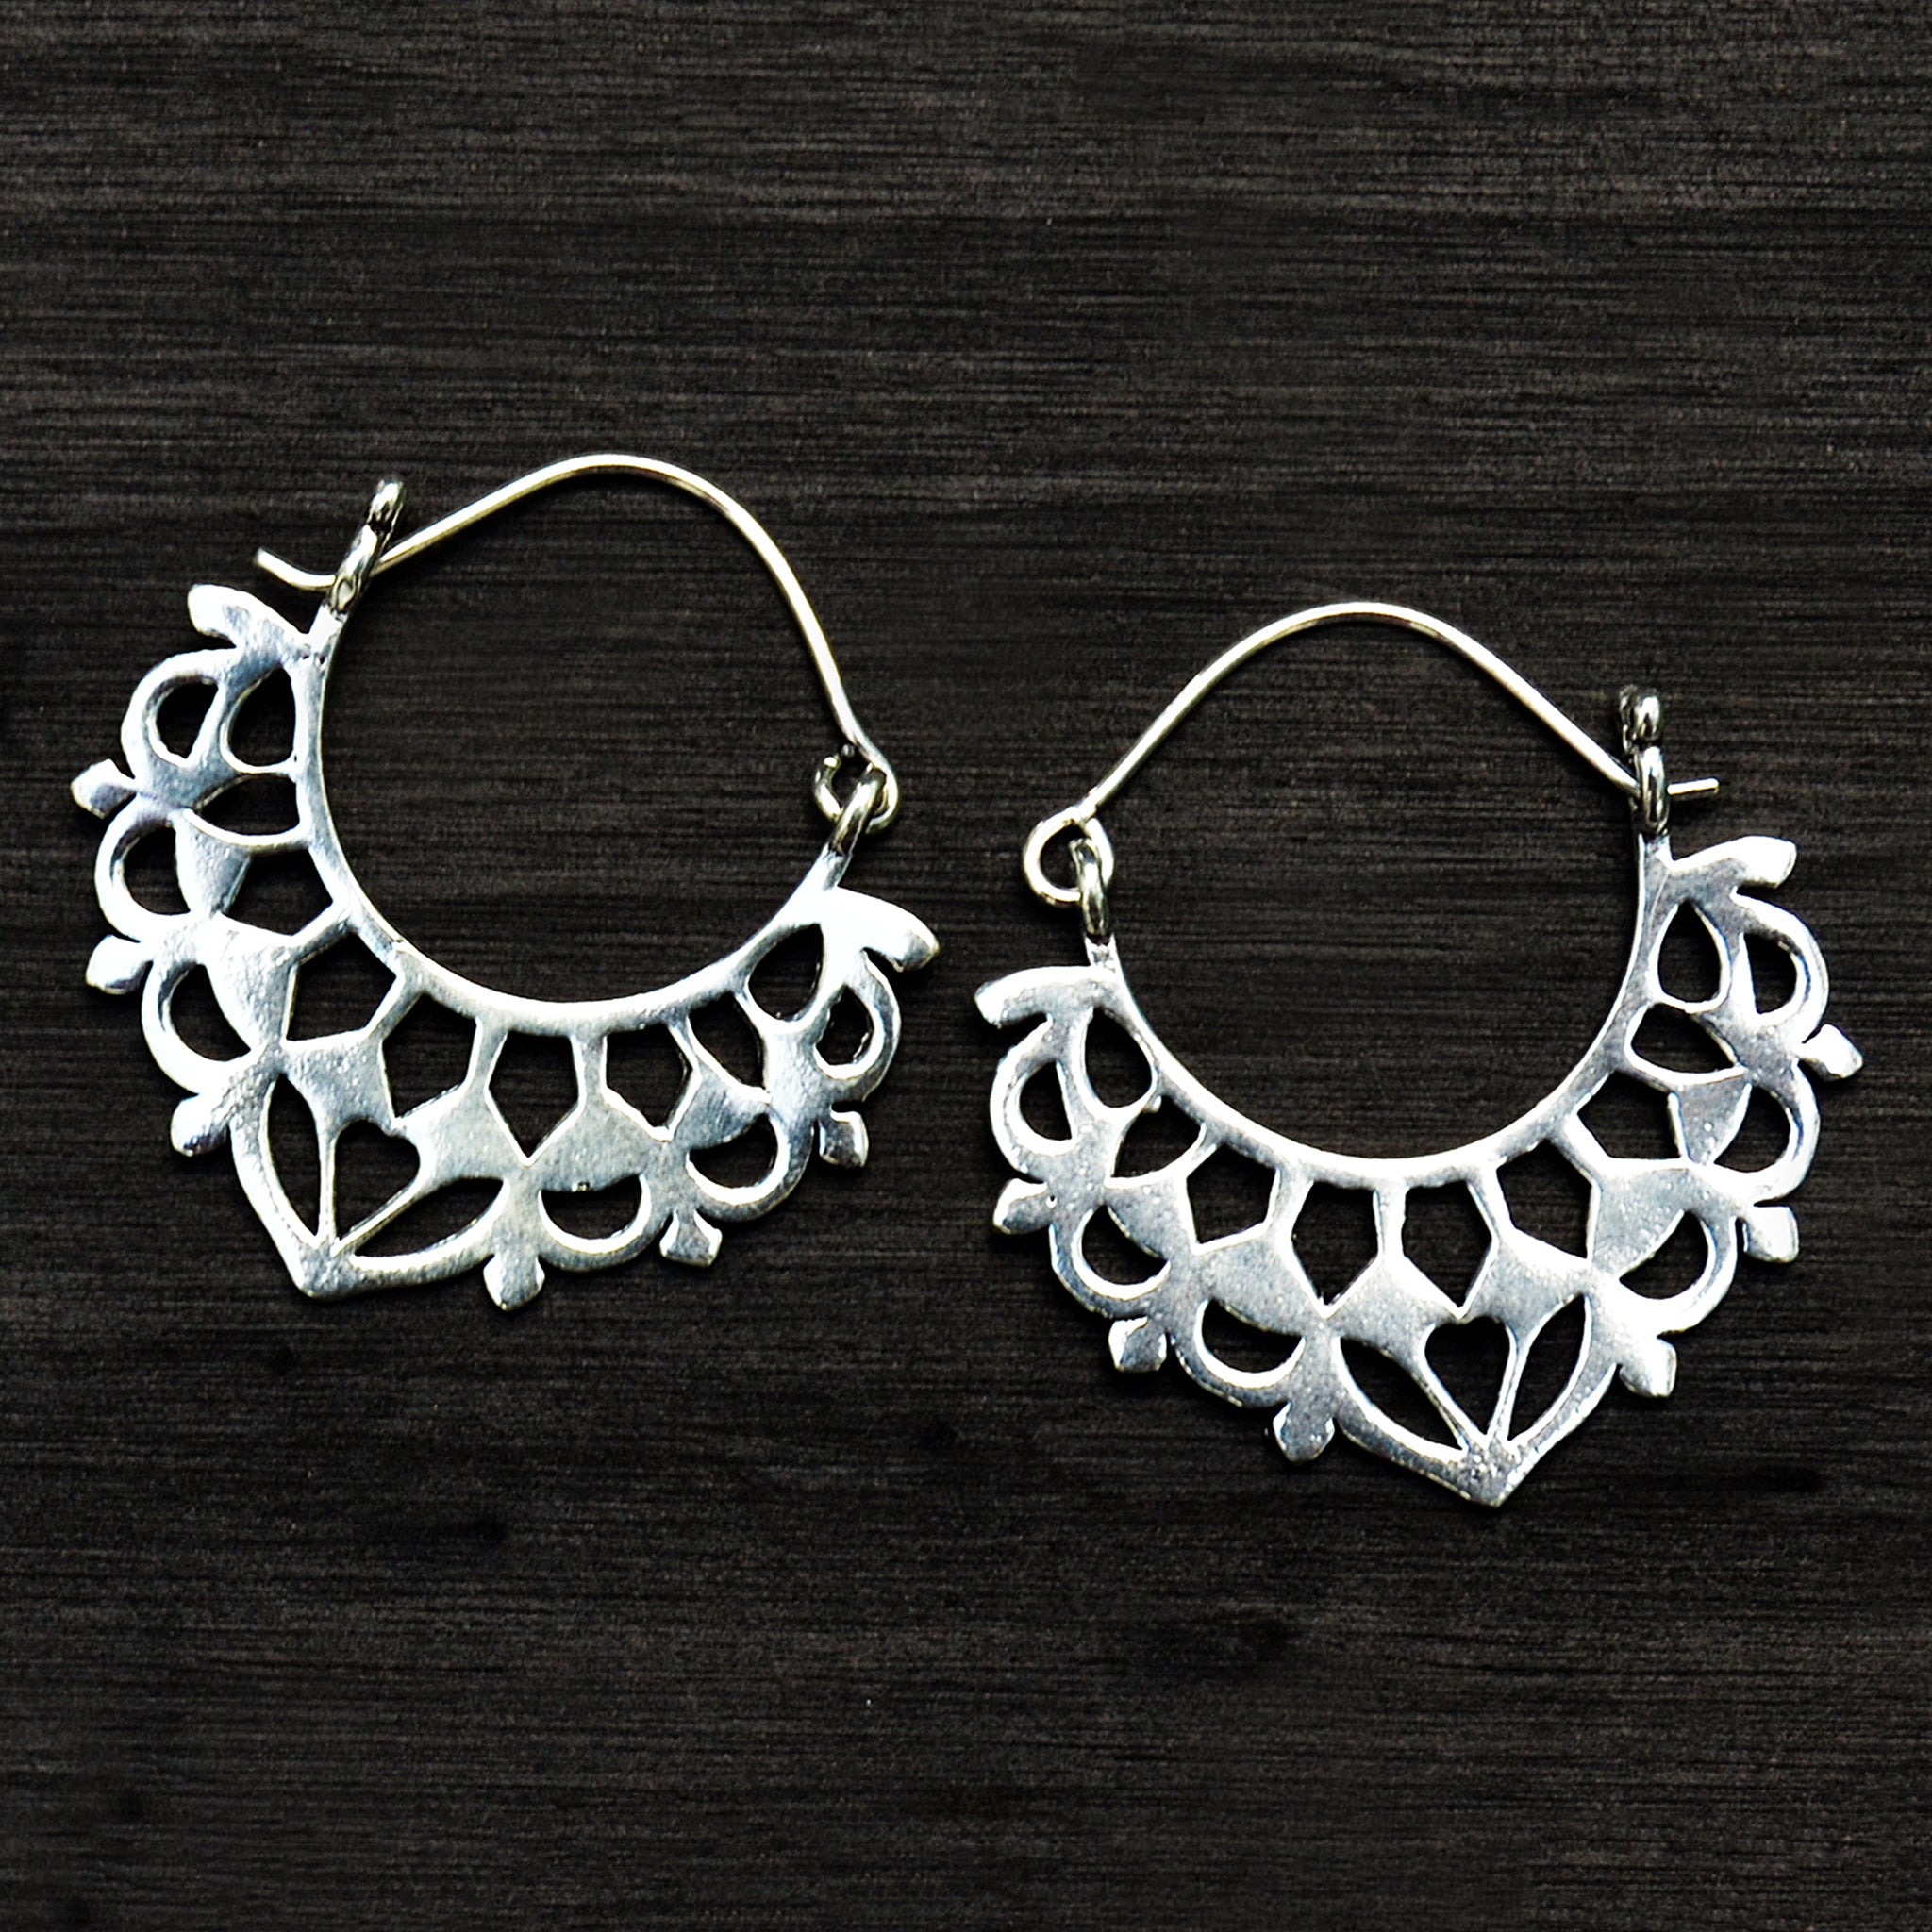 Traditional silver balinese earrings on black background